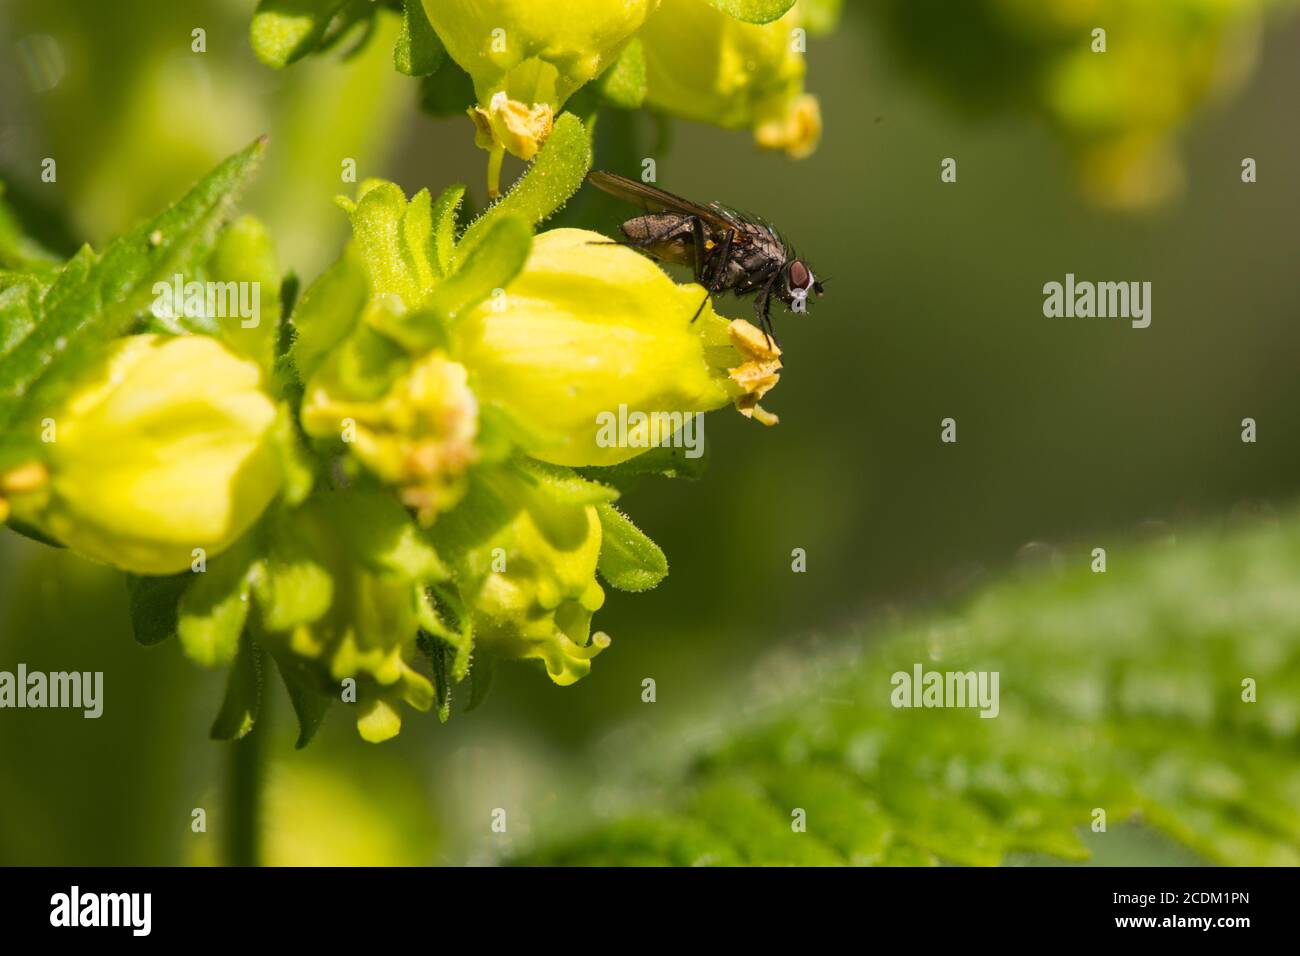 yellow figwort (Scrophularia vernalis), blooming with fly, Netherlands Stock Photo